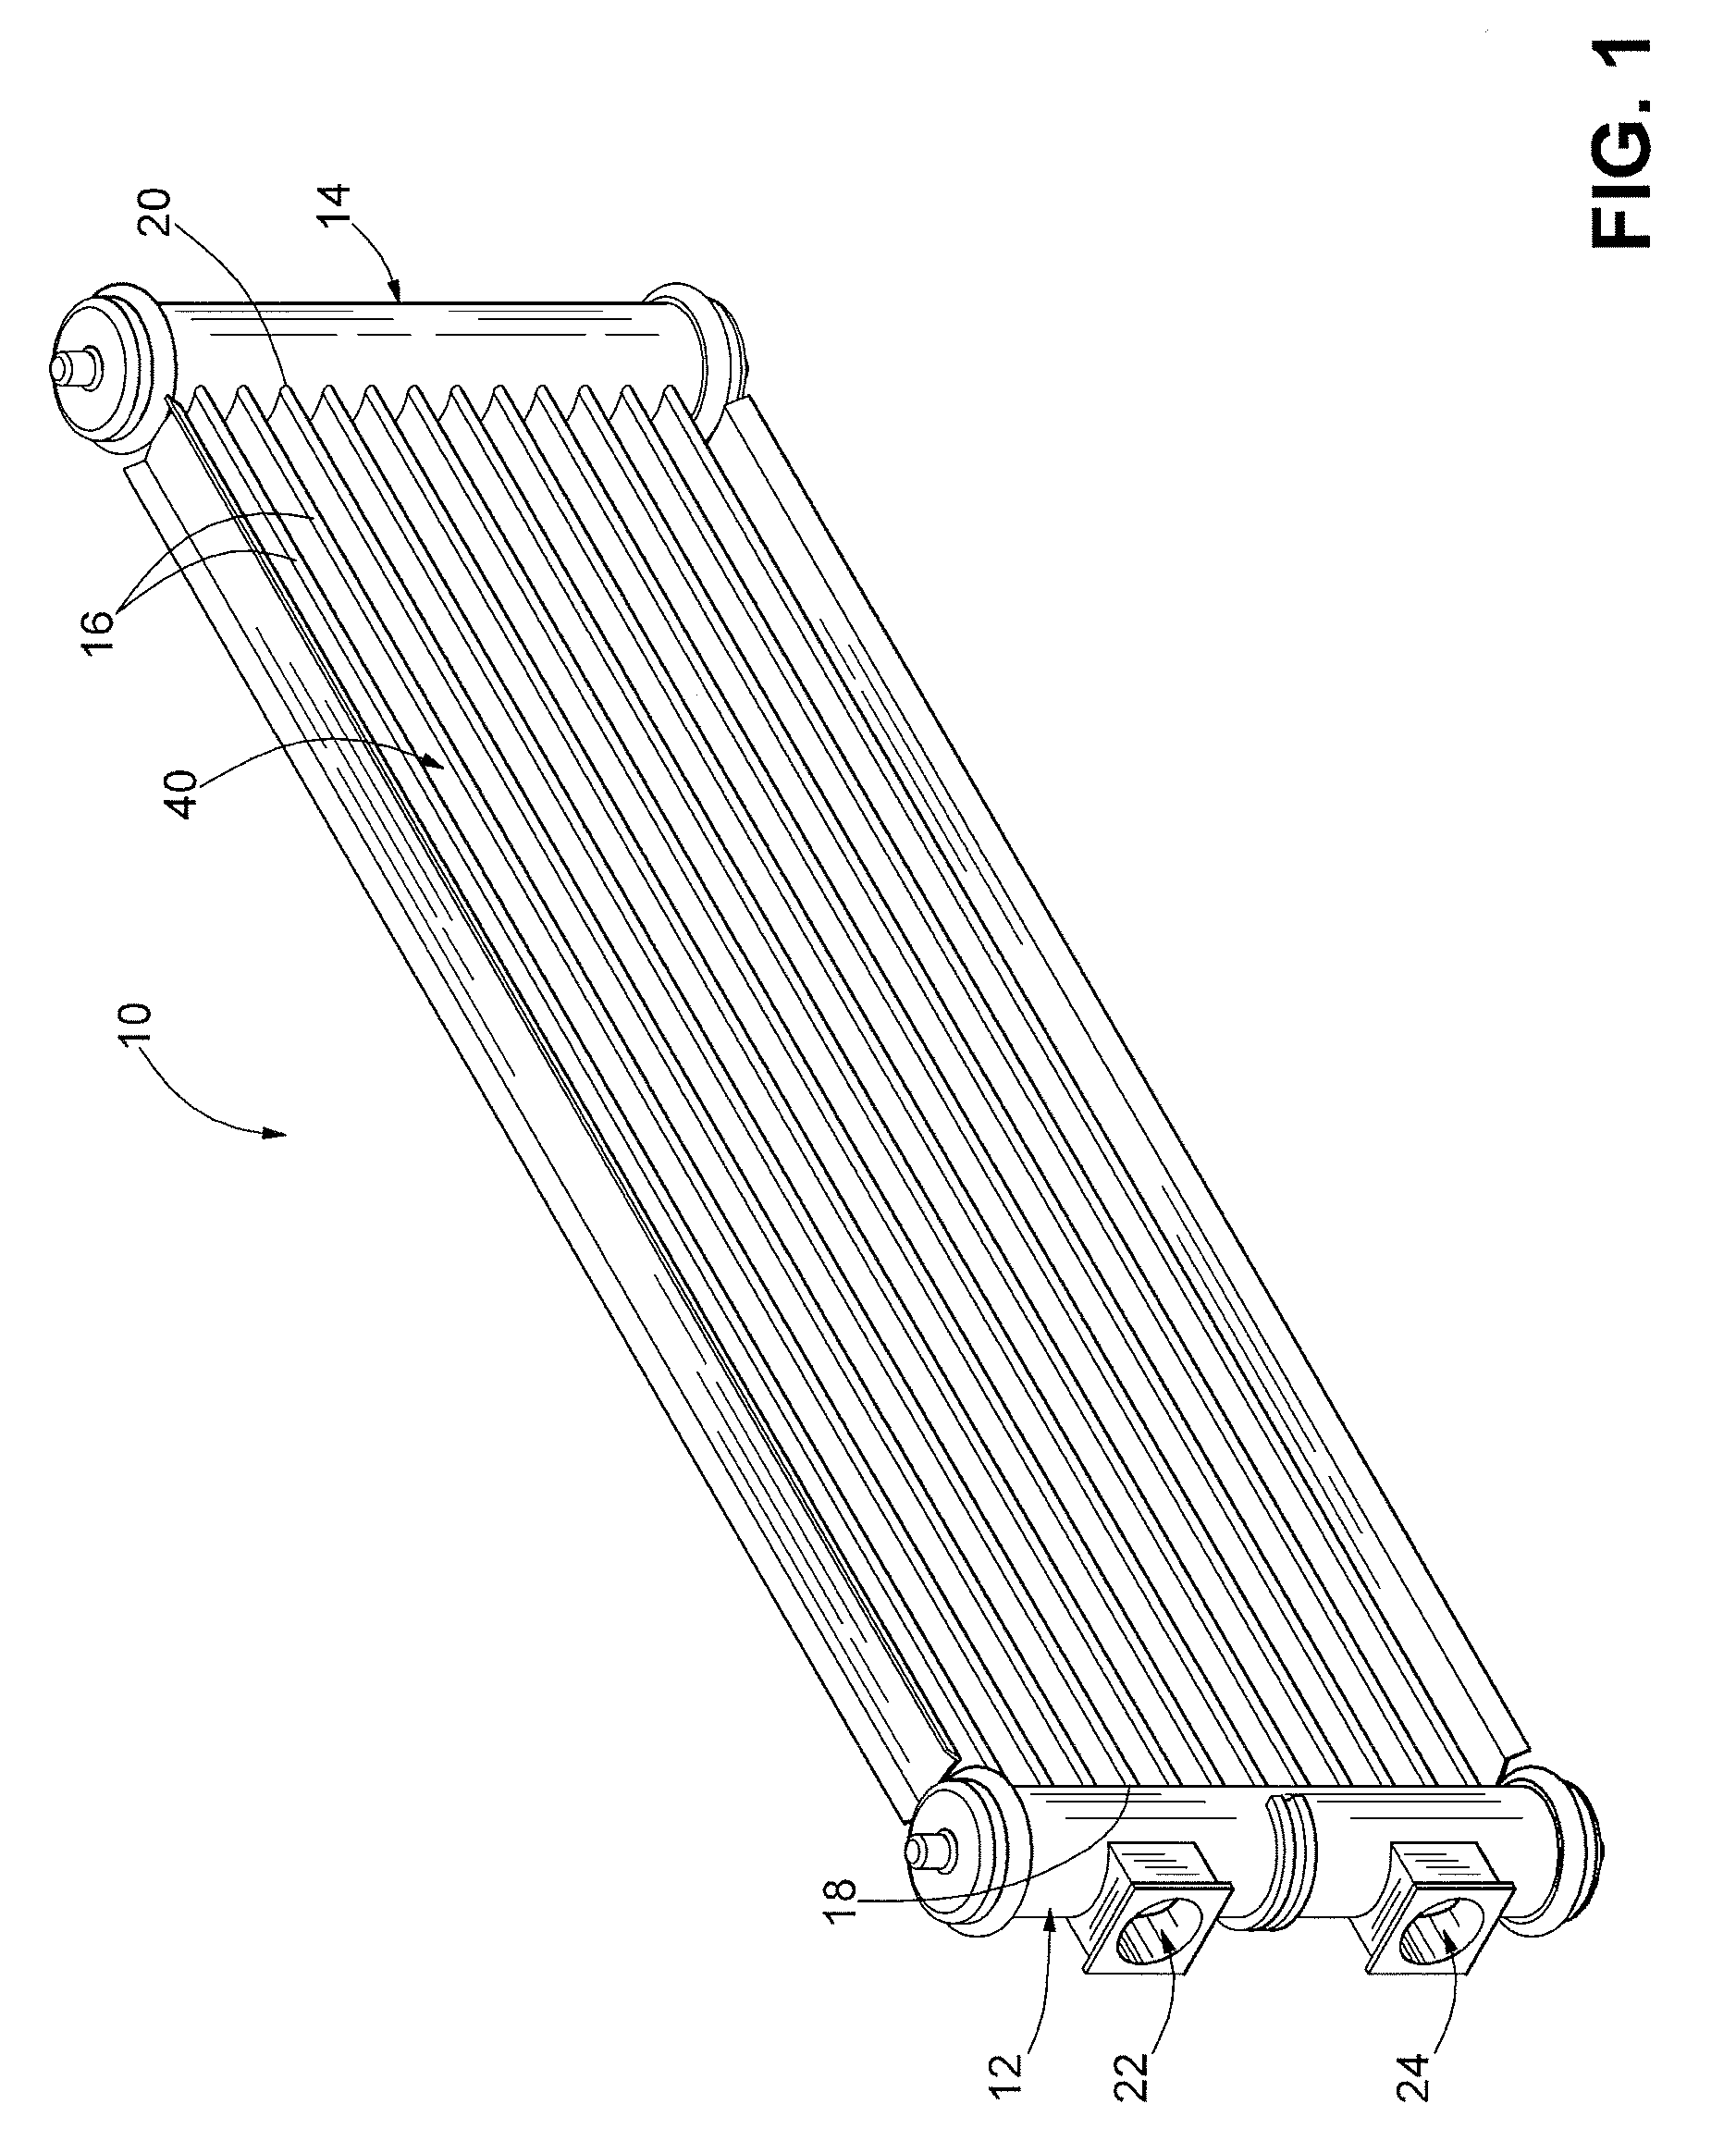 Extruded tube for use in heat exchanger